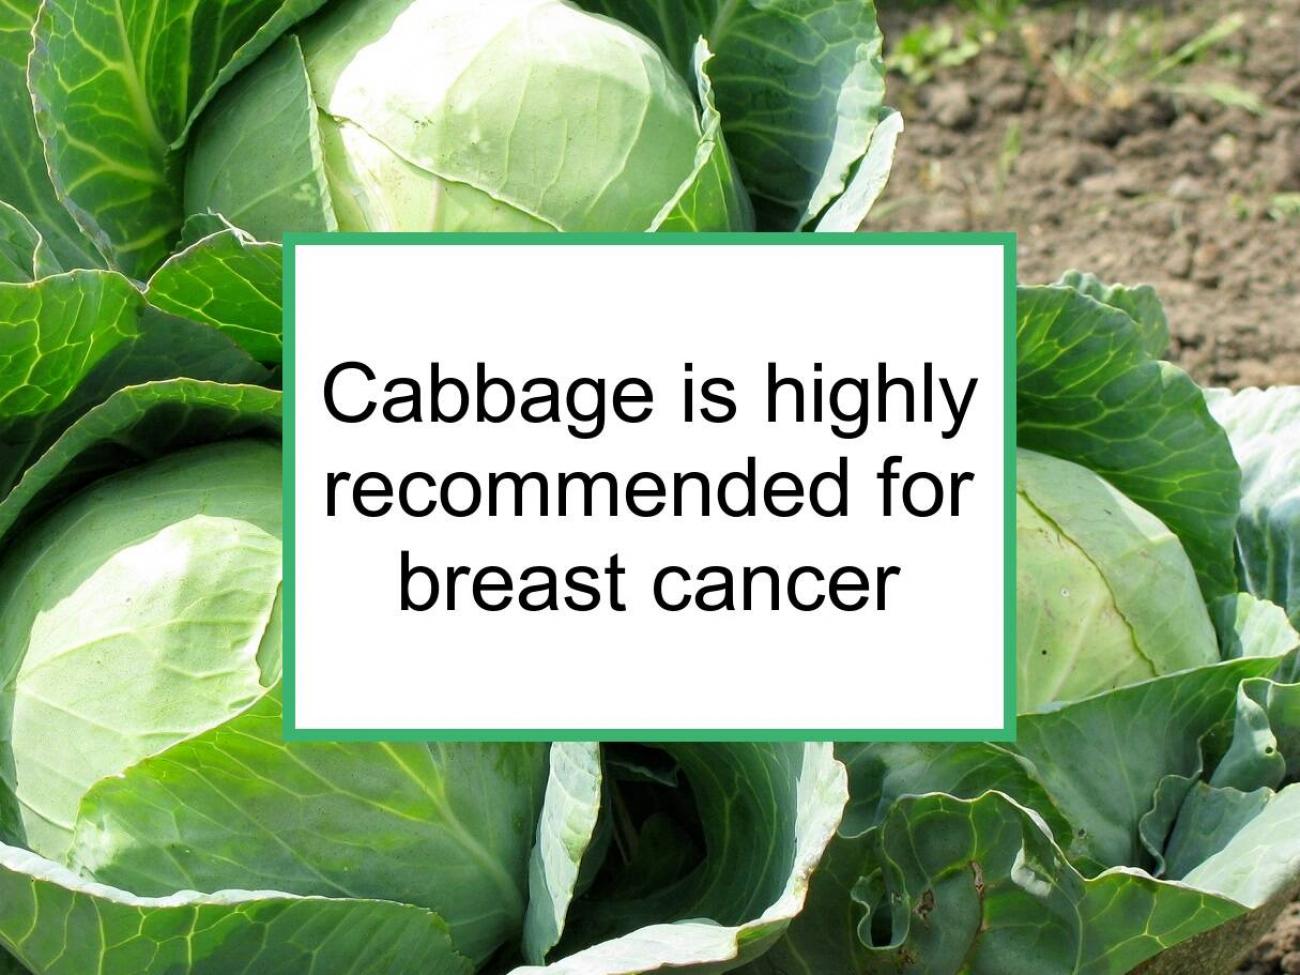 List of plants and other compounds in prevention of breast cancer